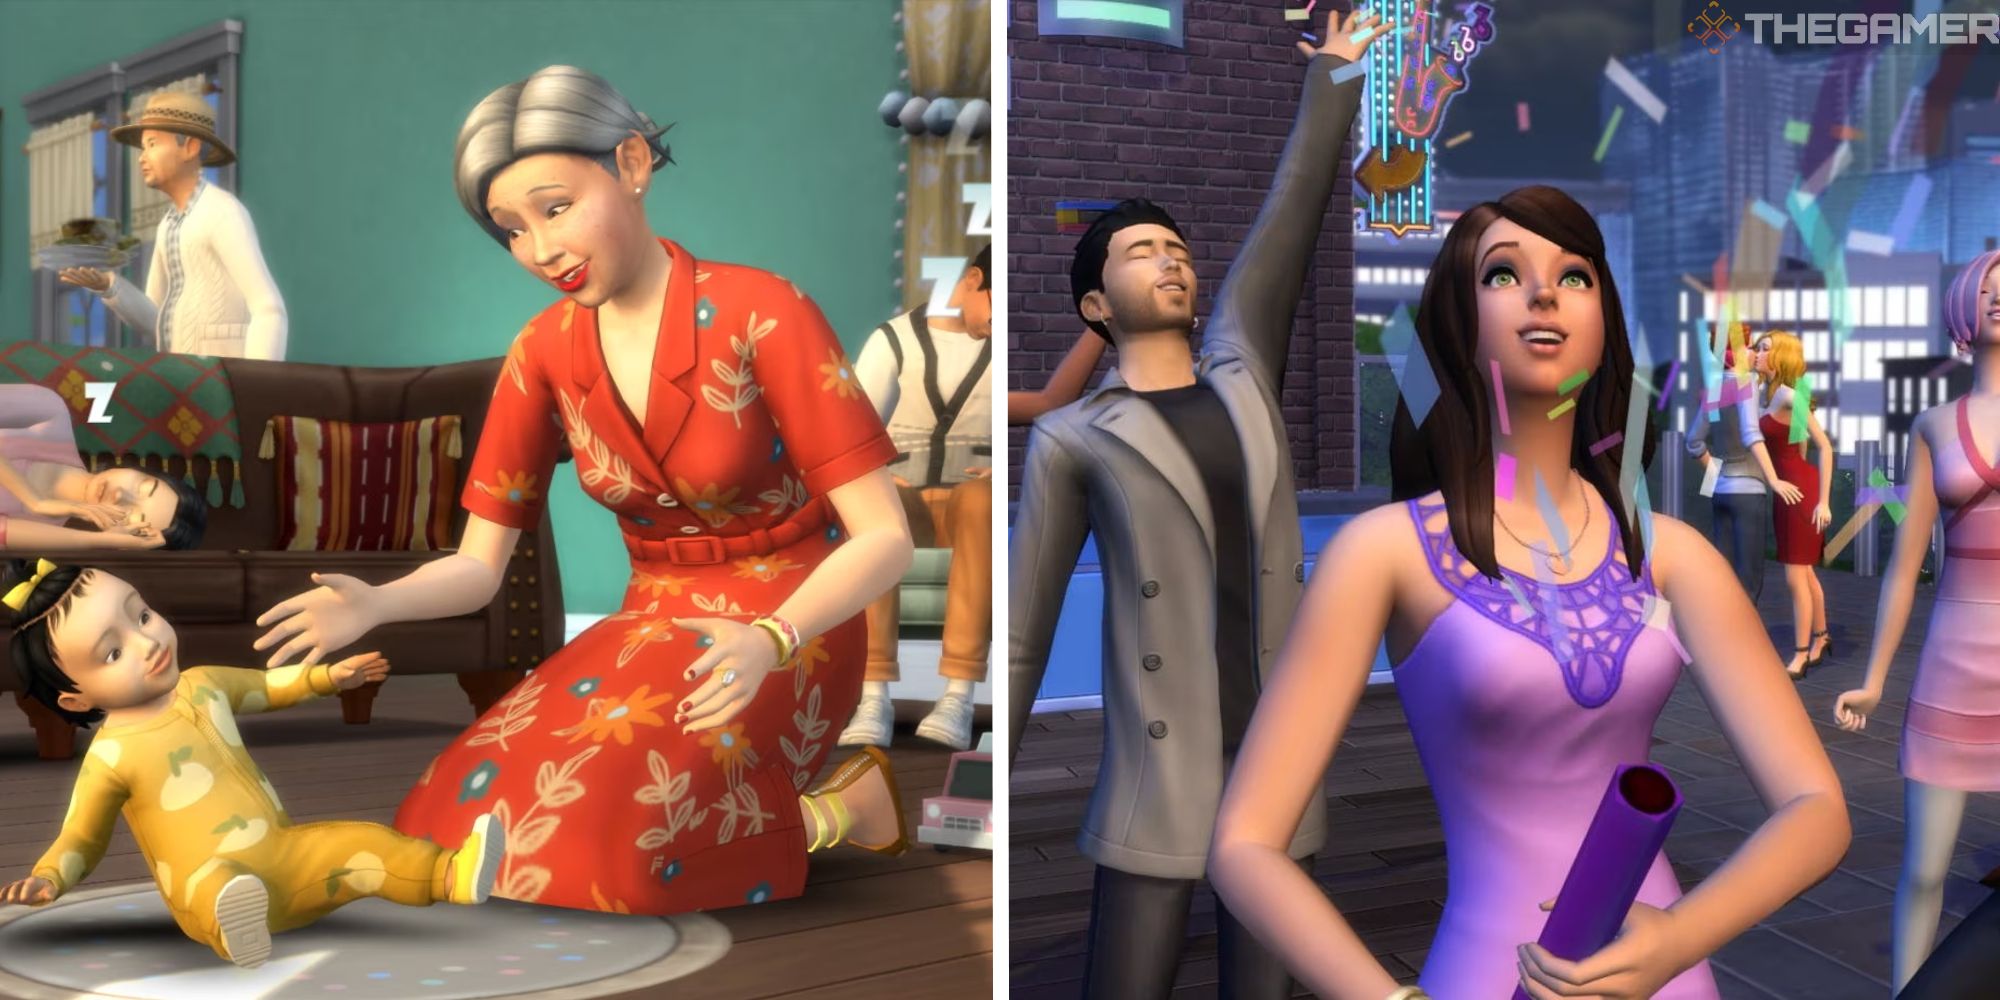 How To Cheat Satisfaction Points in The Sims 4 